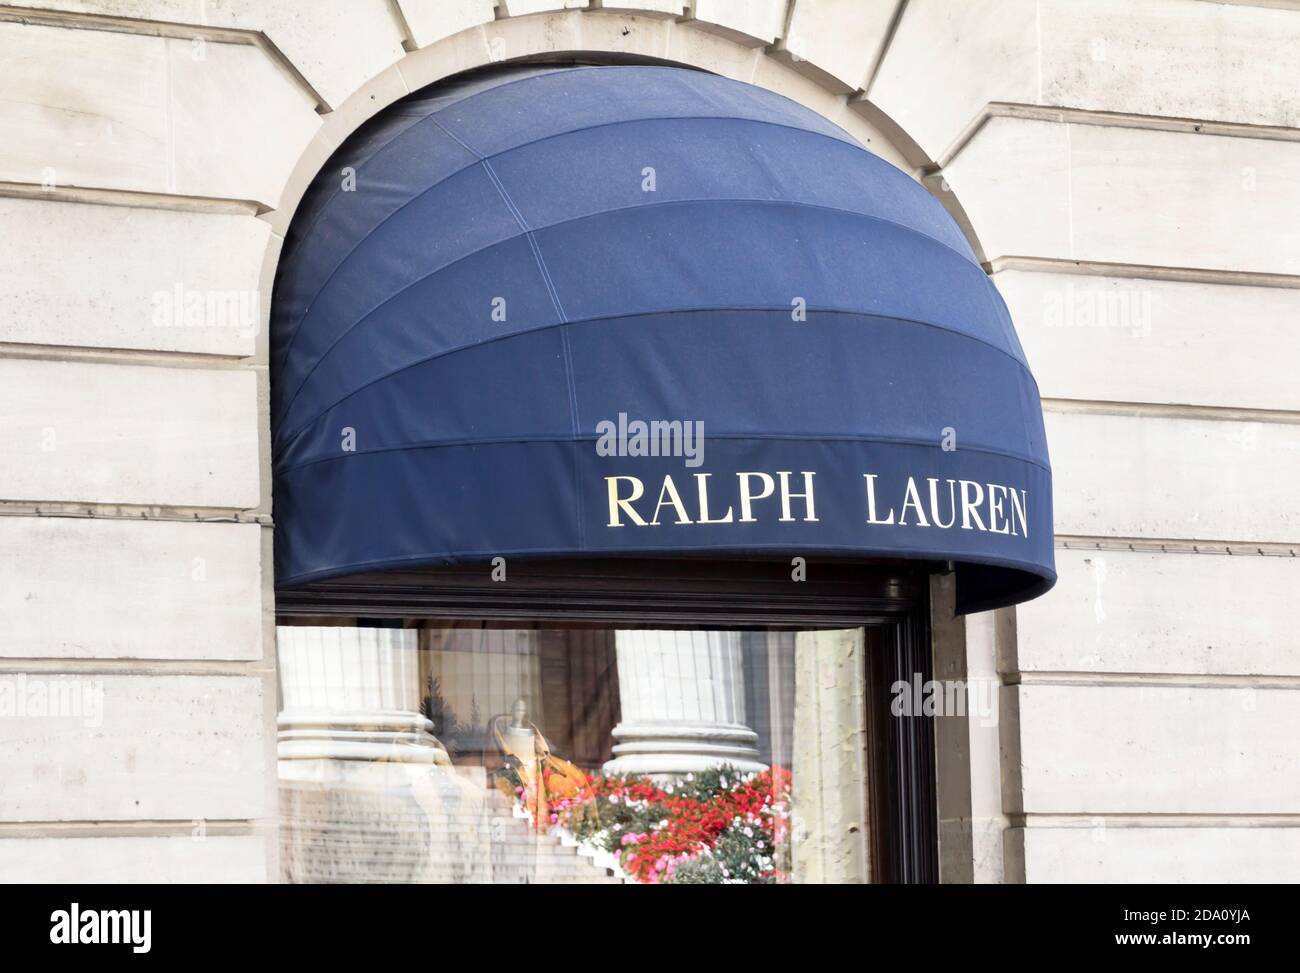 PARIS : Ralph Lauren's first store in Paris opened 1986 Ralph Lauren is the  world famous fashion brand founded in New York.holidays Stock Photo - Alamy